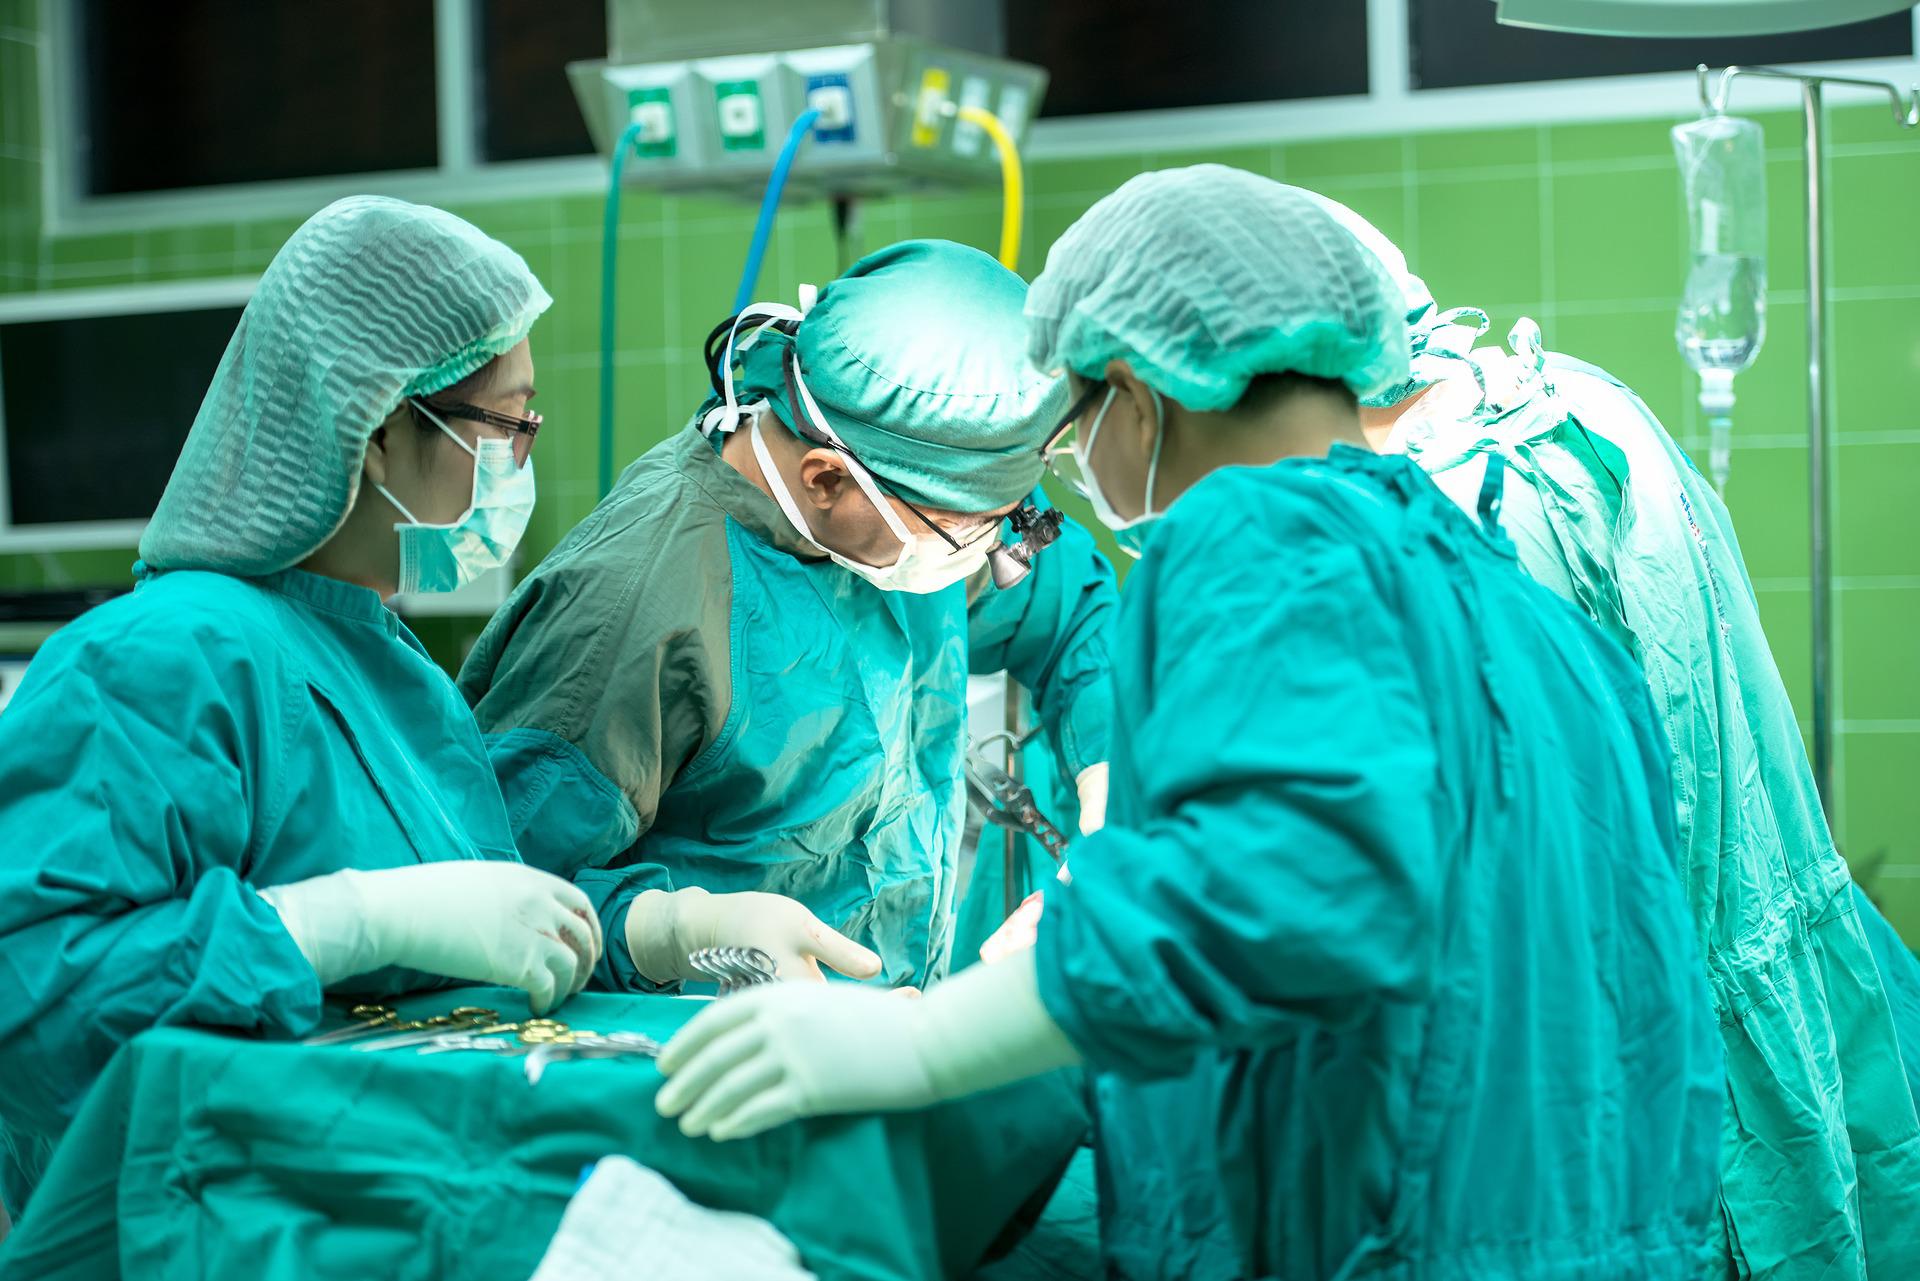 6 Essential Steps to Take Immediately After Experiencing Surgical Negligence